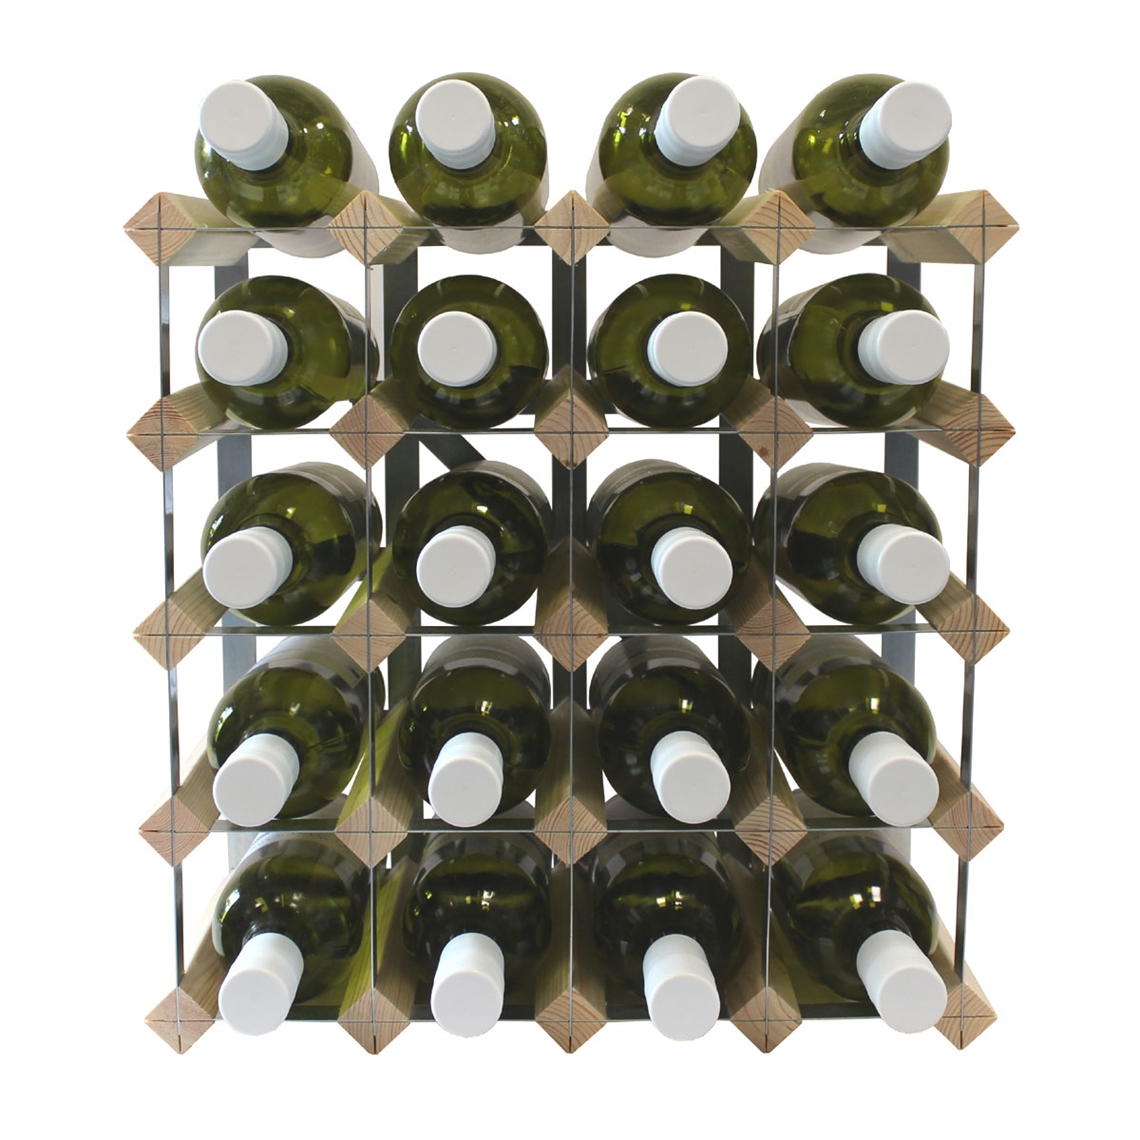 View more freestanding display racks from our Assembled Wine Racks range